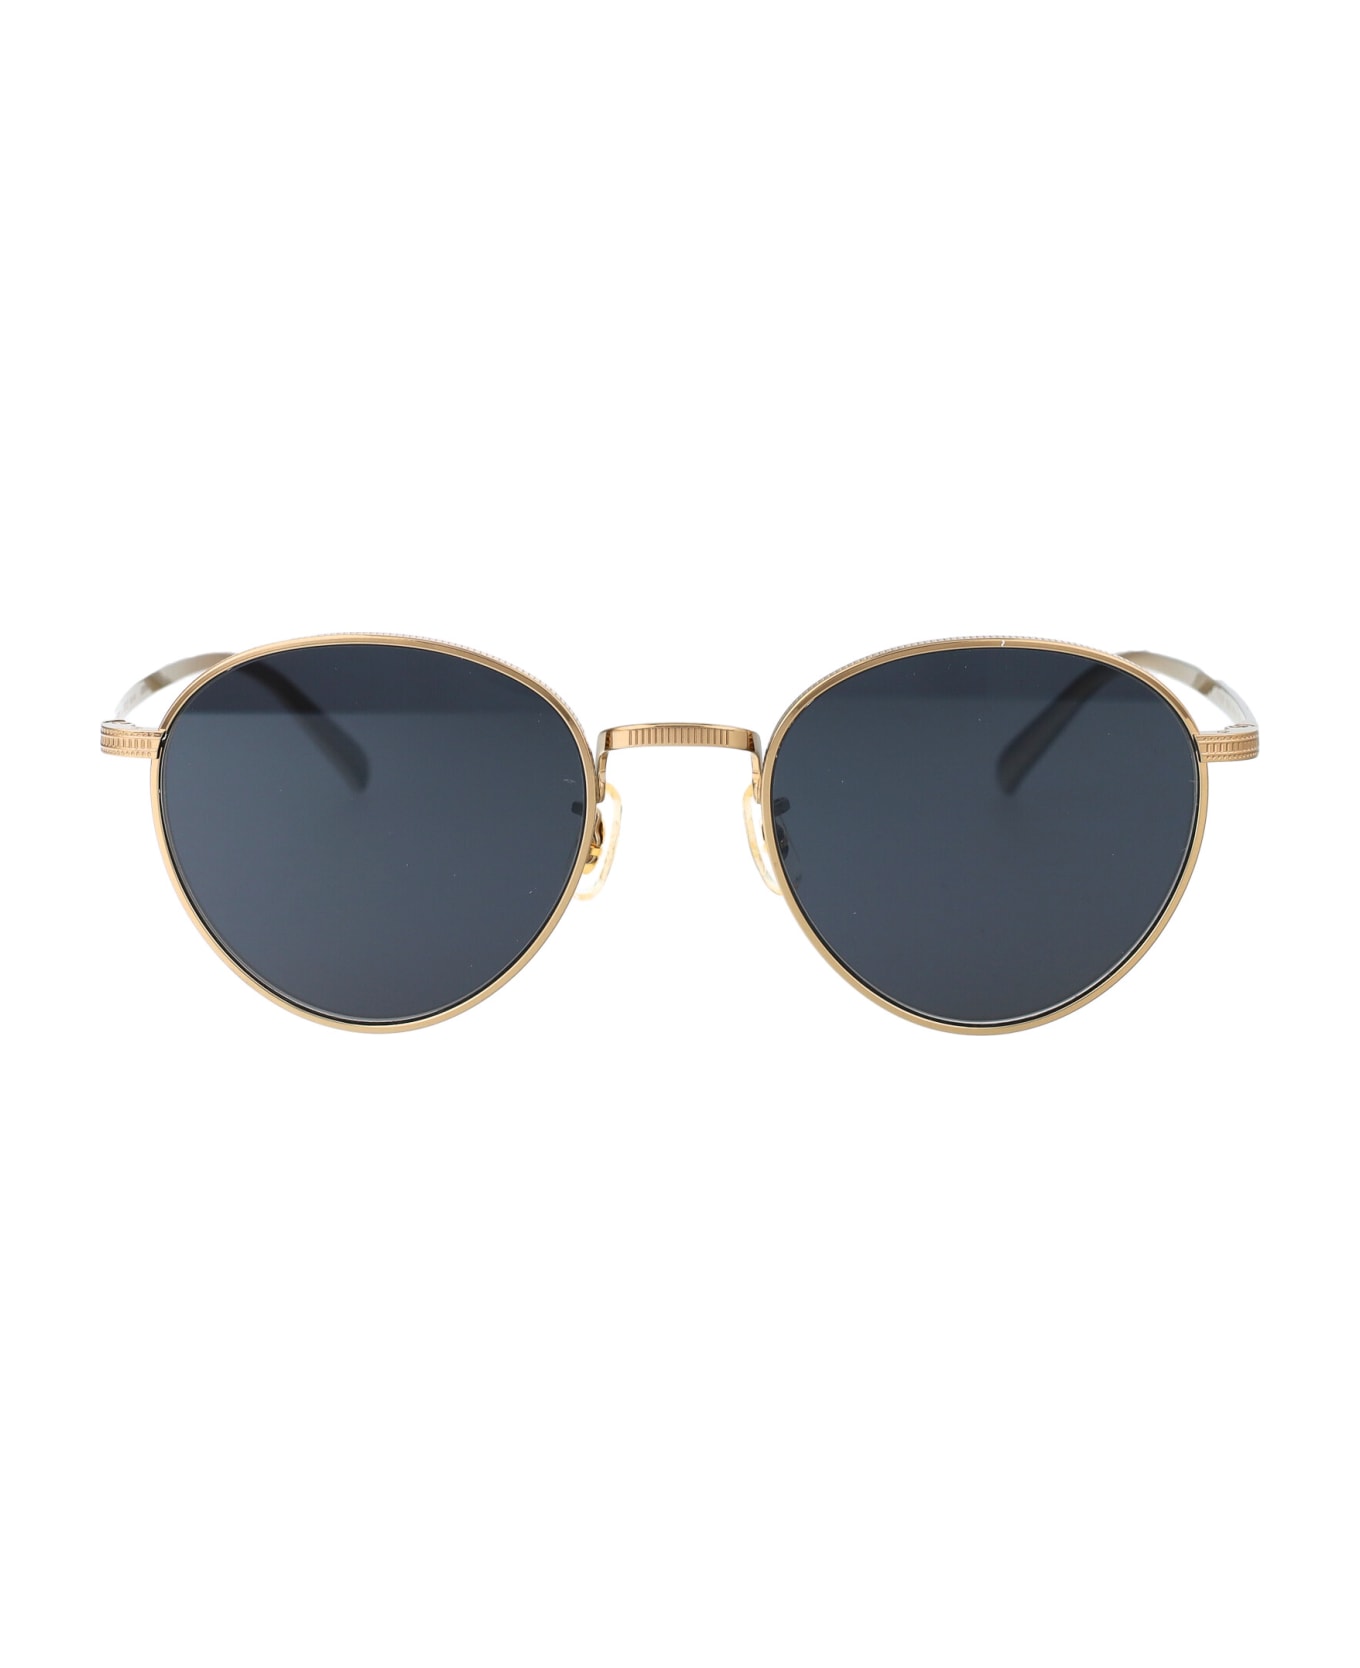 Oliver Peoples Rhydian Sunglasses - 5035R5 Gold